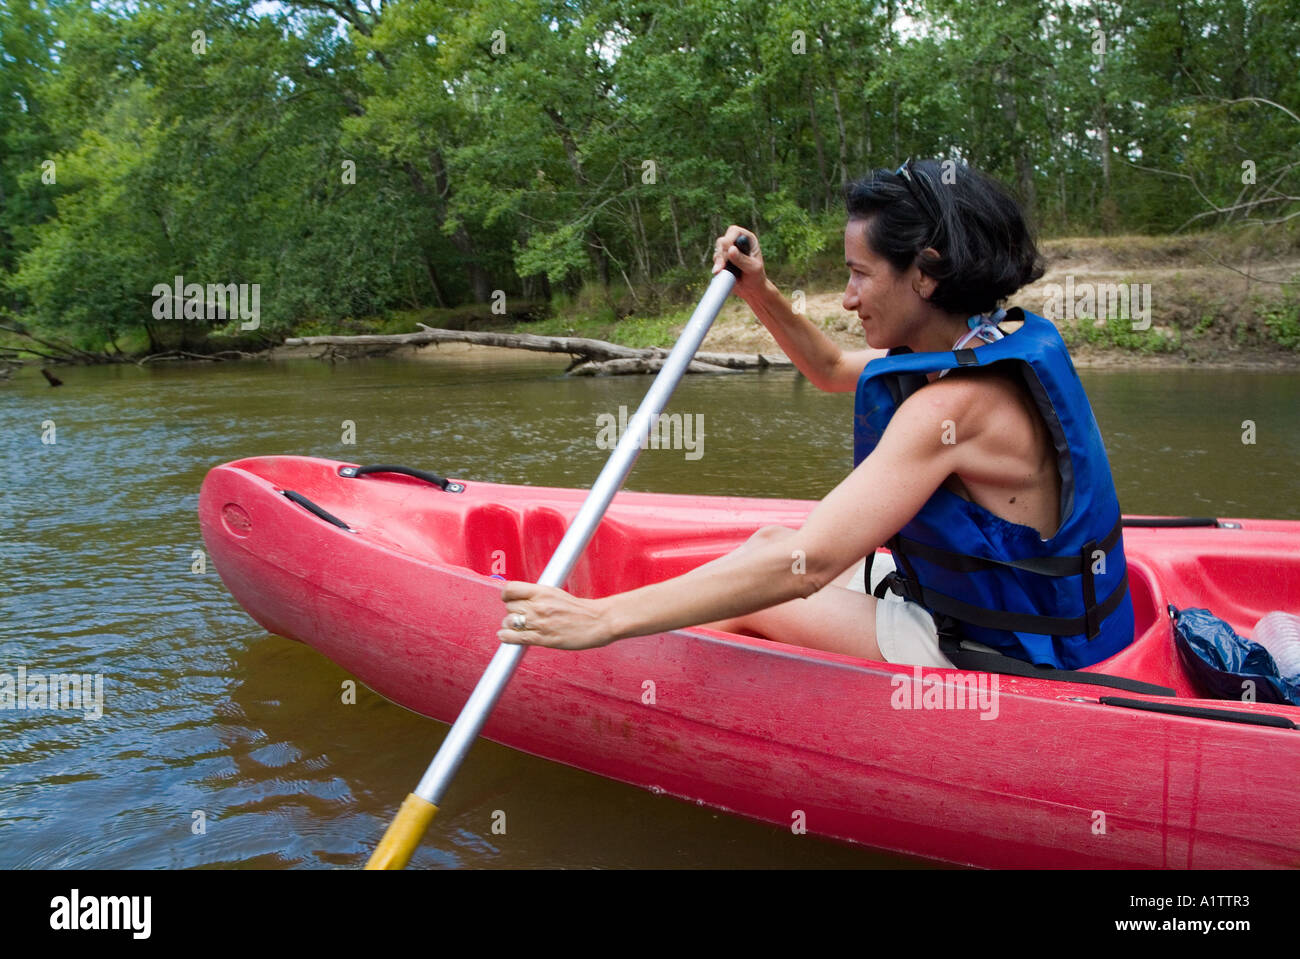 Woman canoeing on the Eyre river, Aquitaine, France. Stock Photo